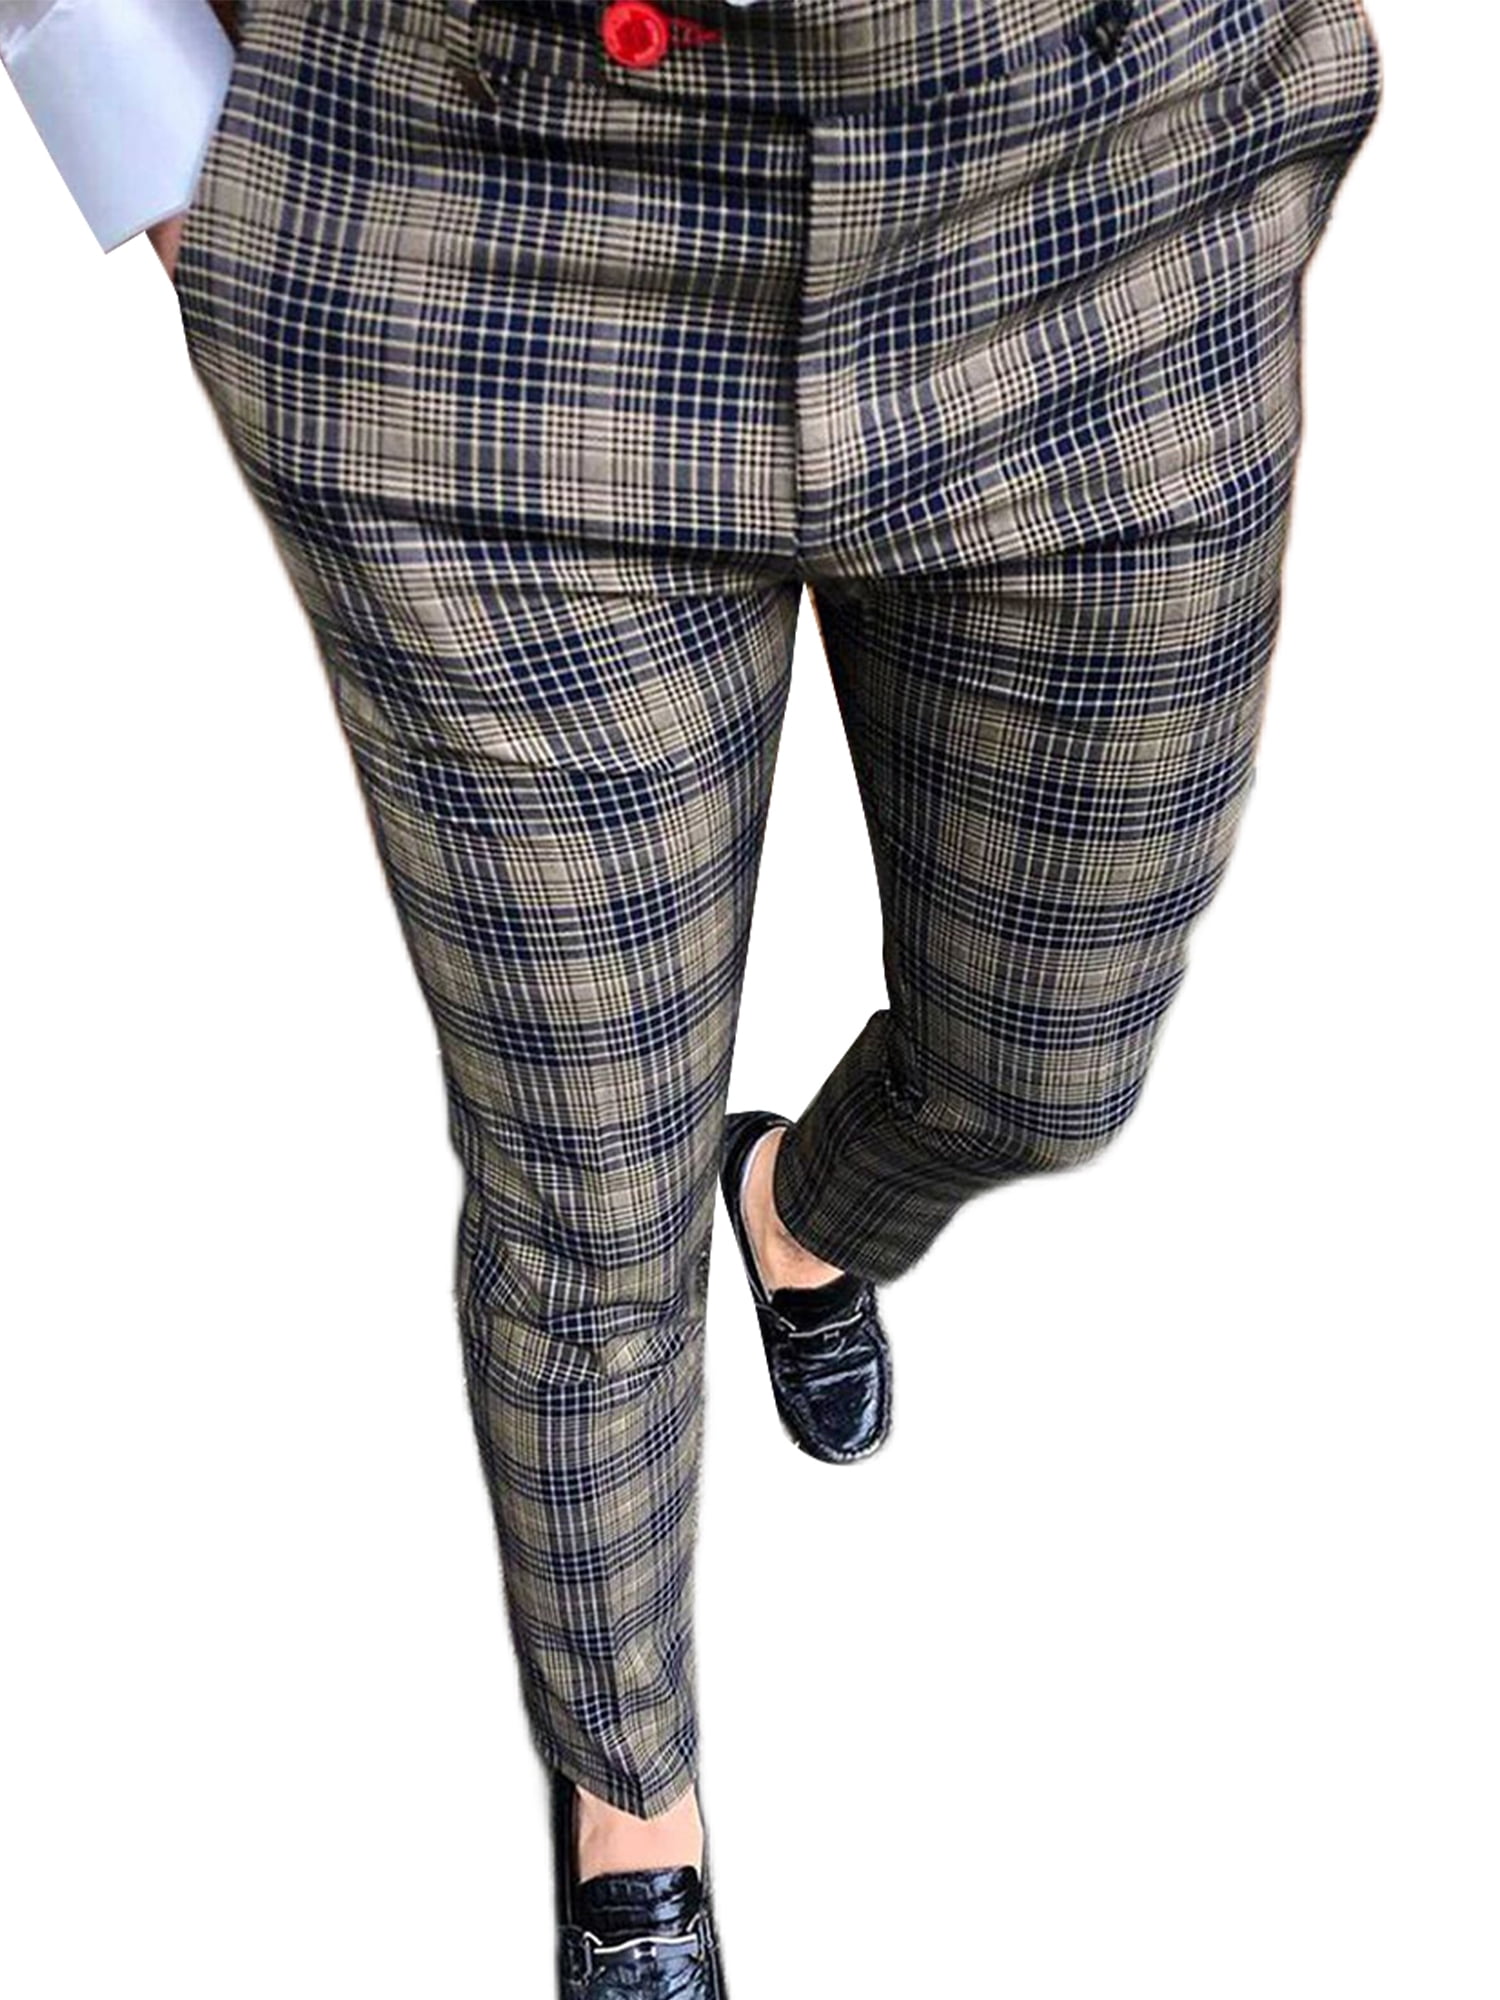 Glonme Men's Pants Striped Trousers Plaid Pencil Pant Work Fitted